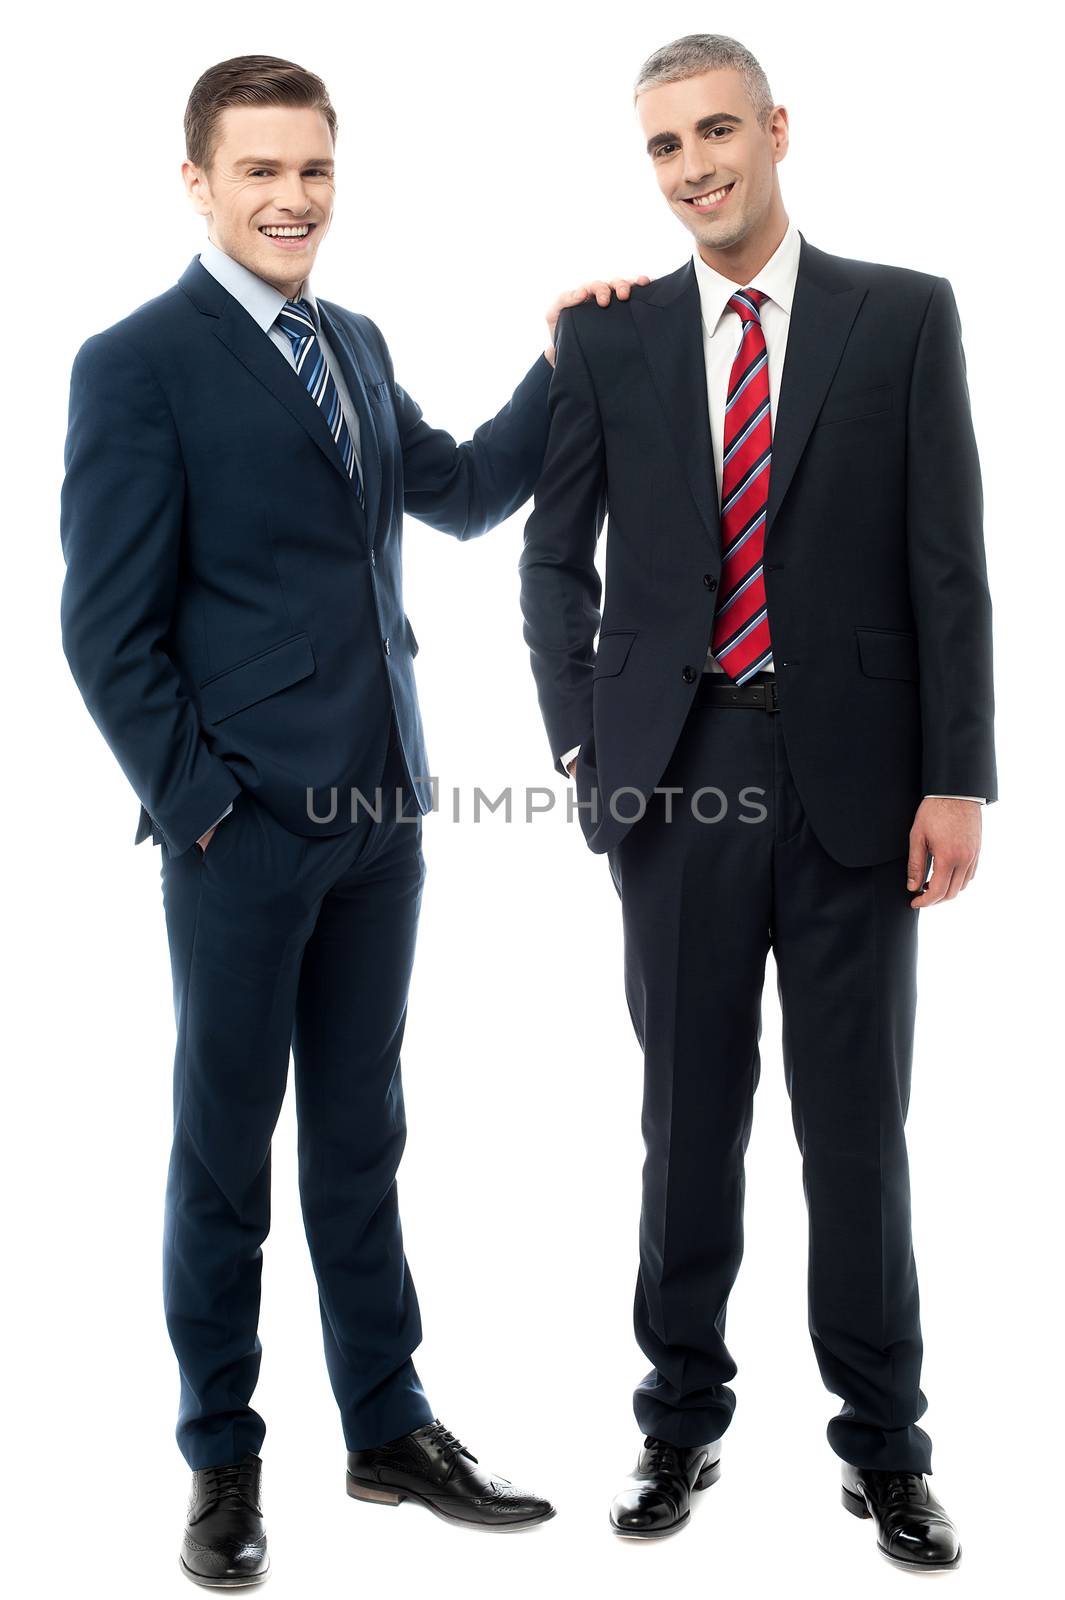 Two business partners posing together by stockyimages